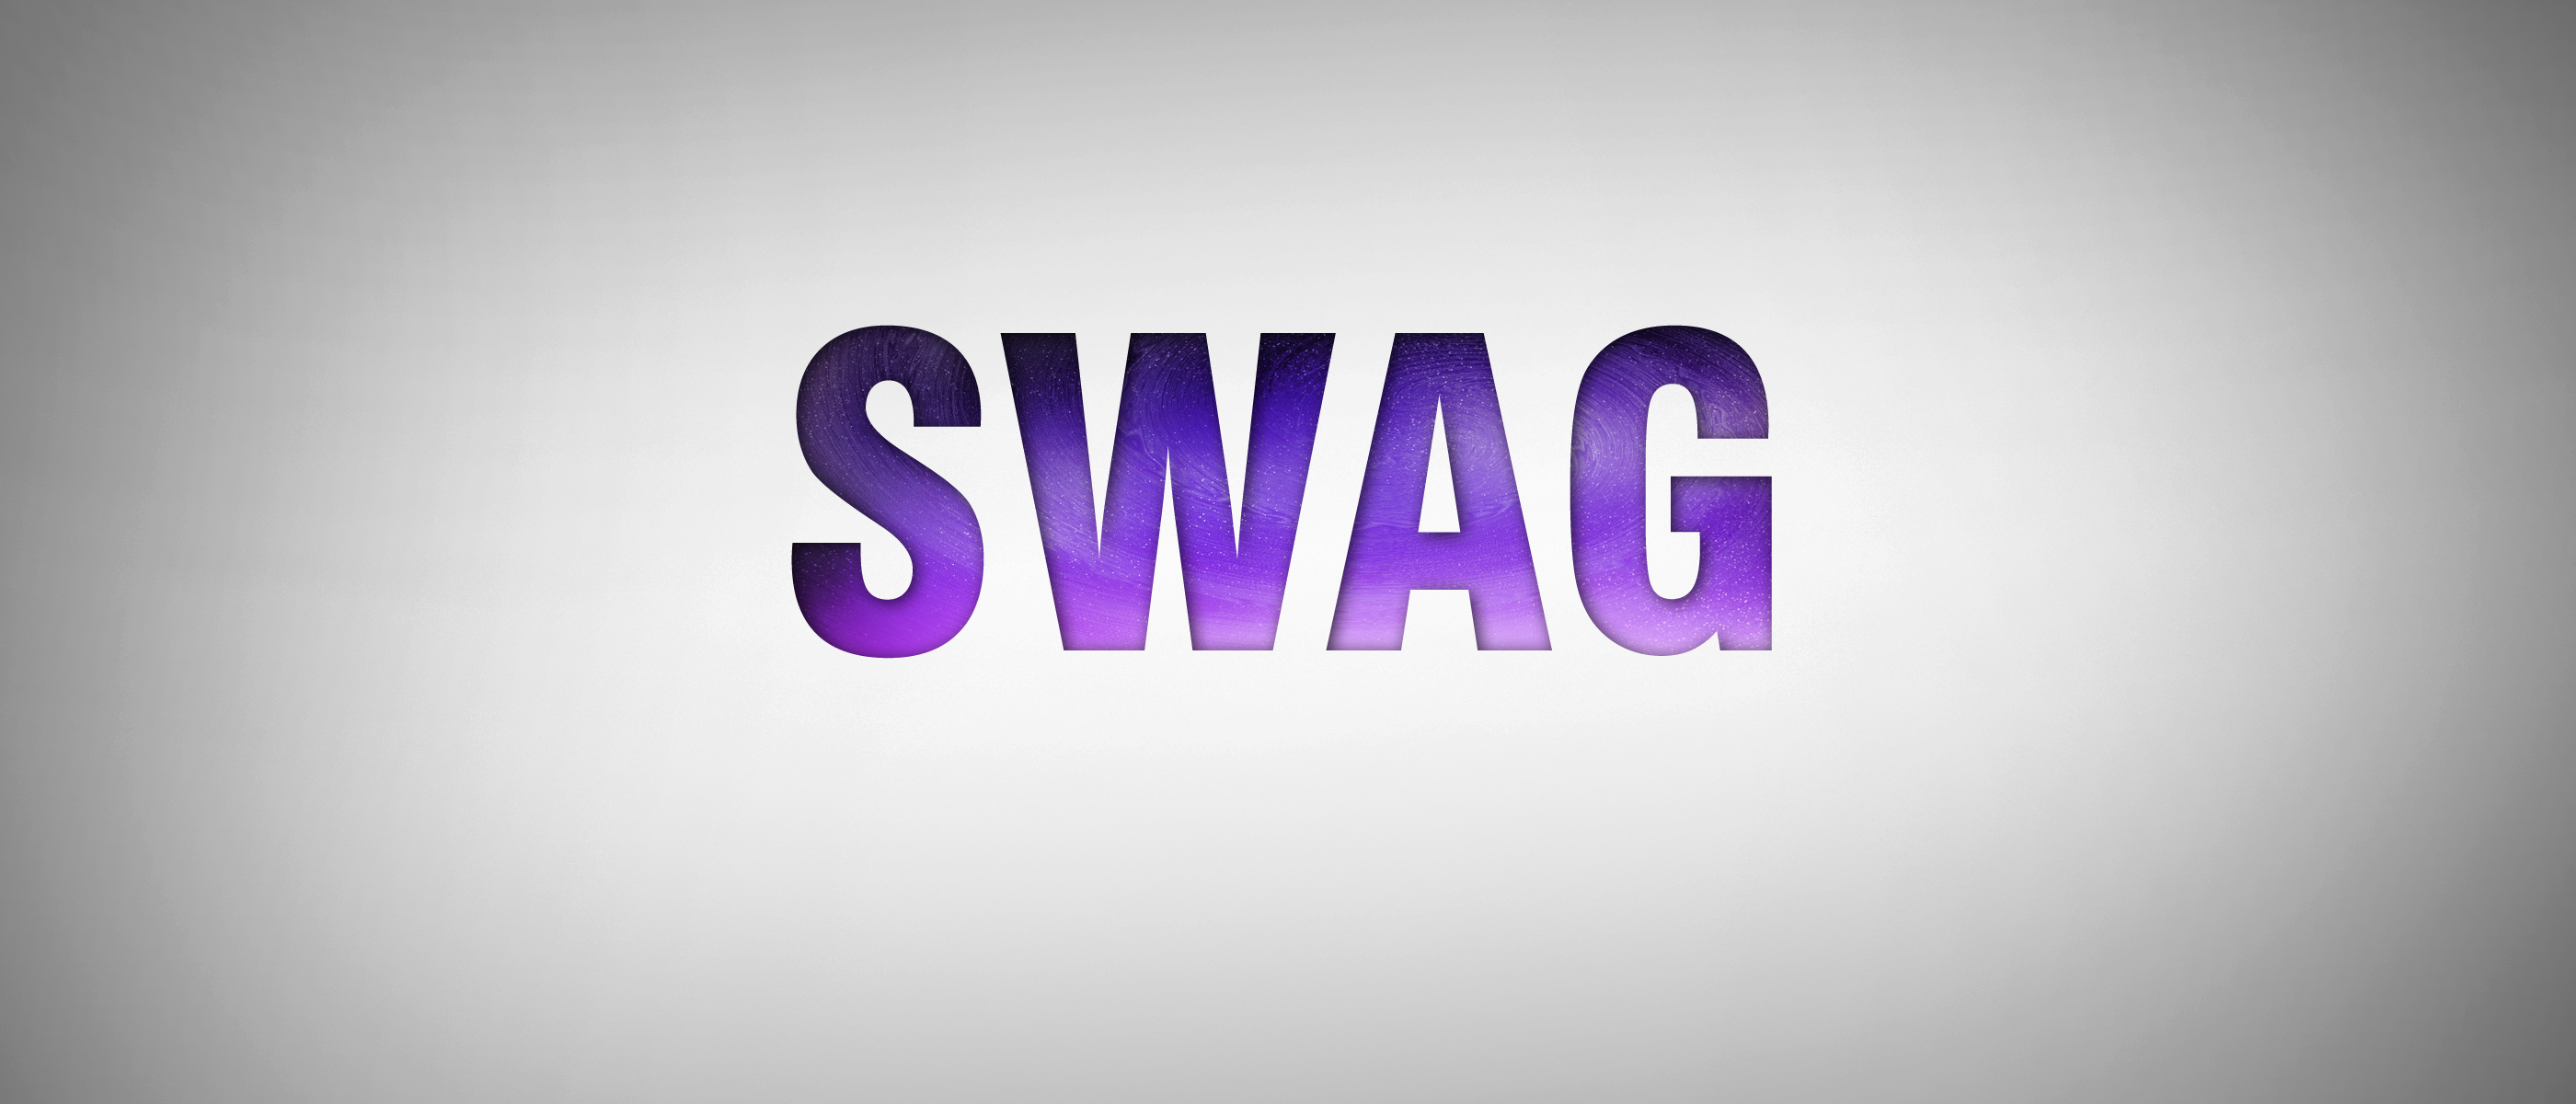 Swag Full Hd Wallpaper And Background 2800x1200 Id 693663 HD Wallpapers Download Free Map Images Wallpaper [wallpaper376.blogspot.com]